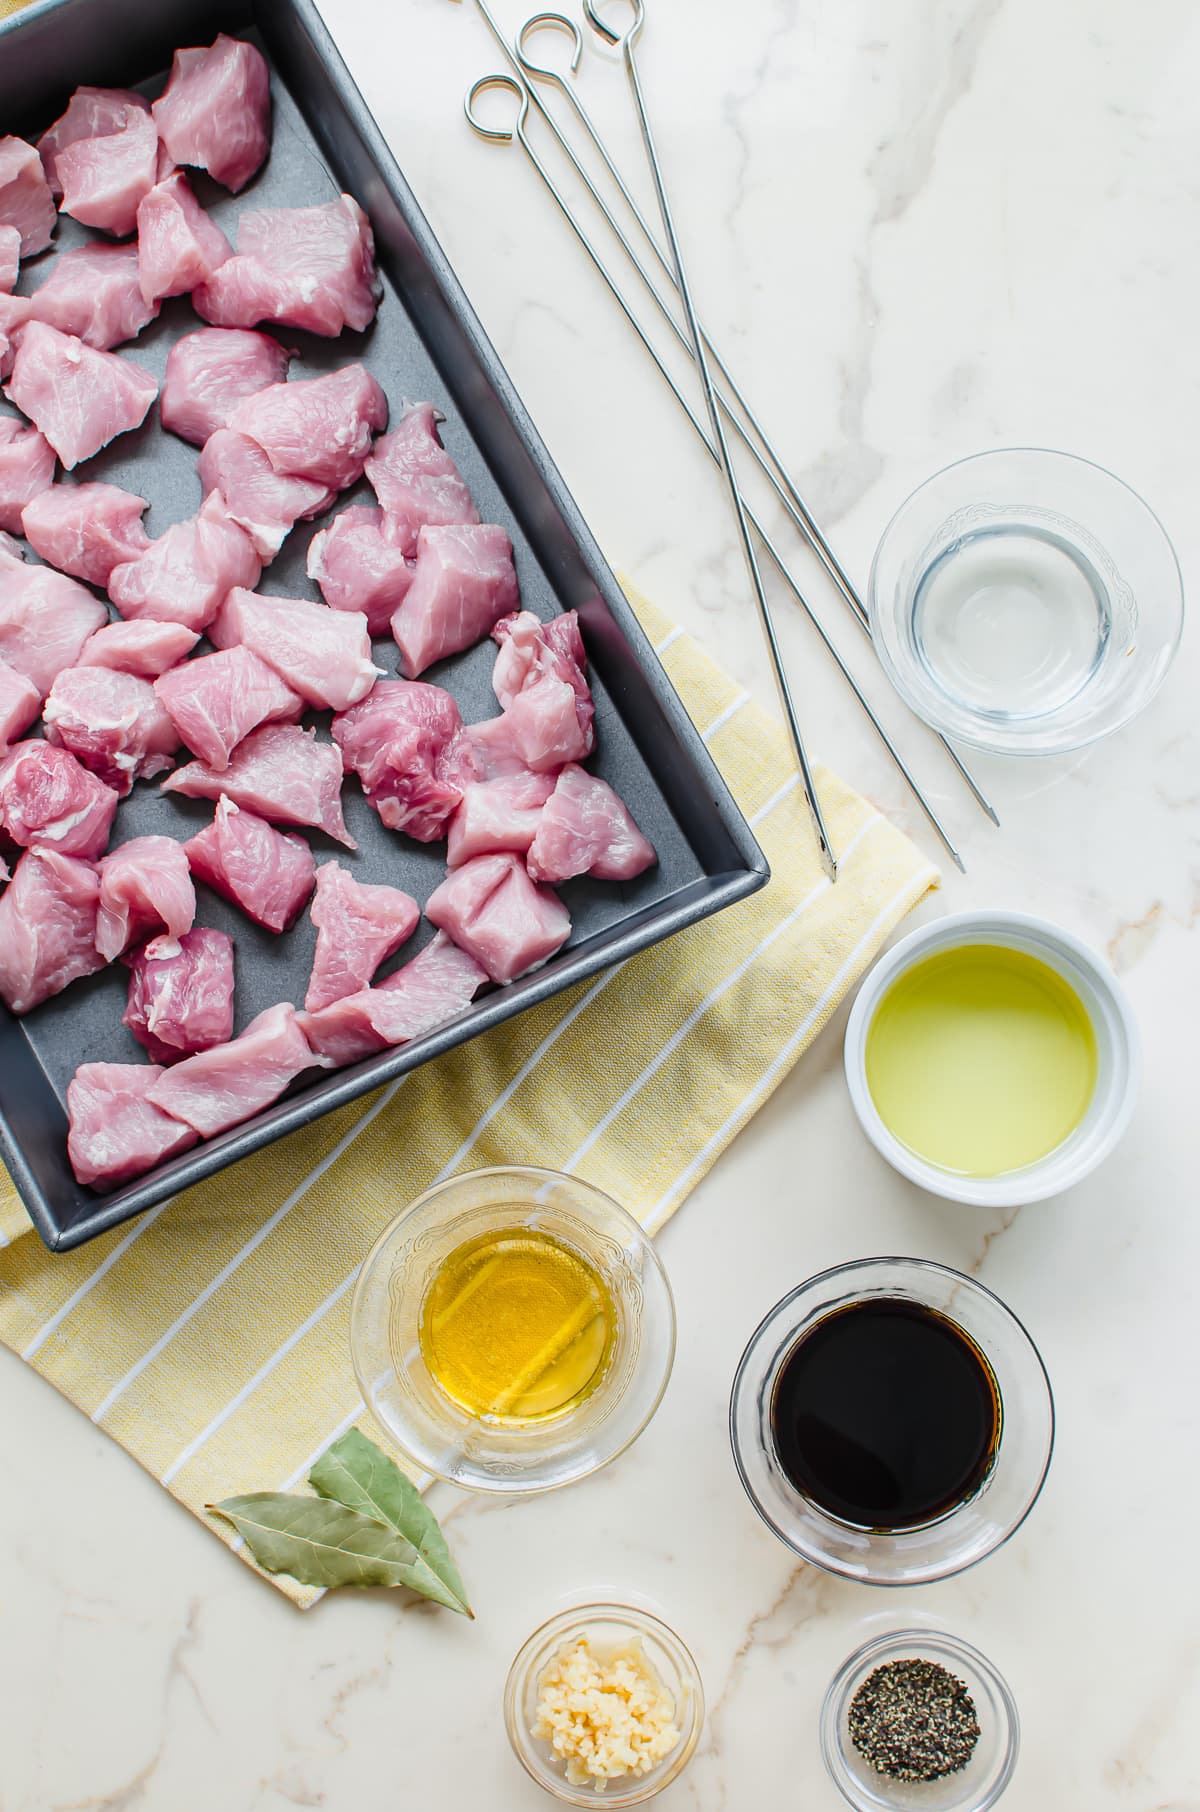 Pork tenderloin pieces in a pan with bowls for adobo marinade on the side.